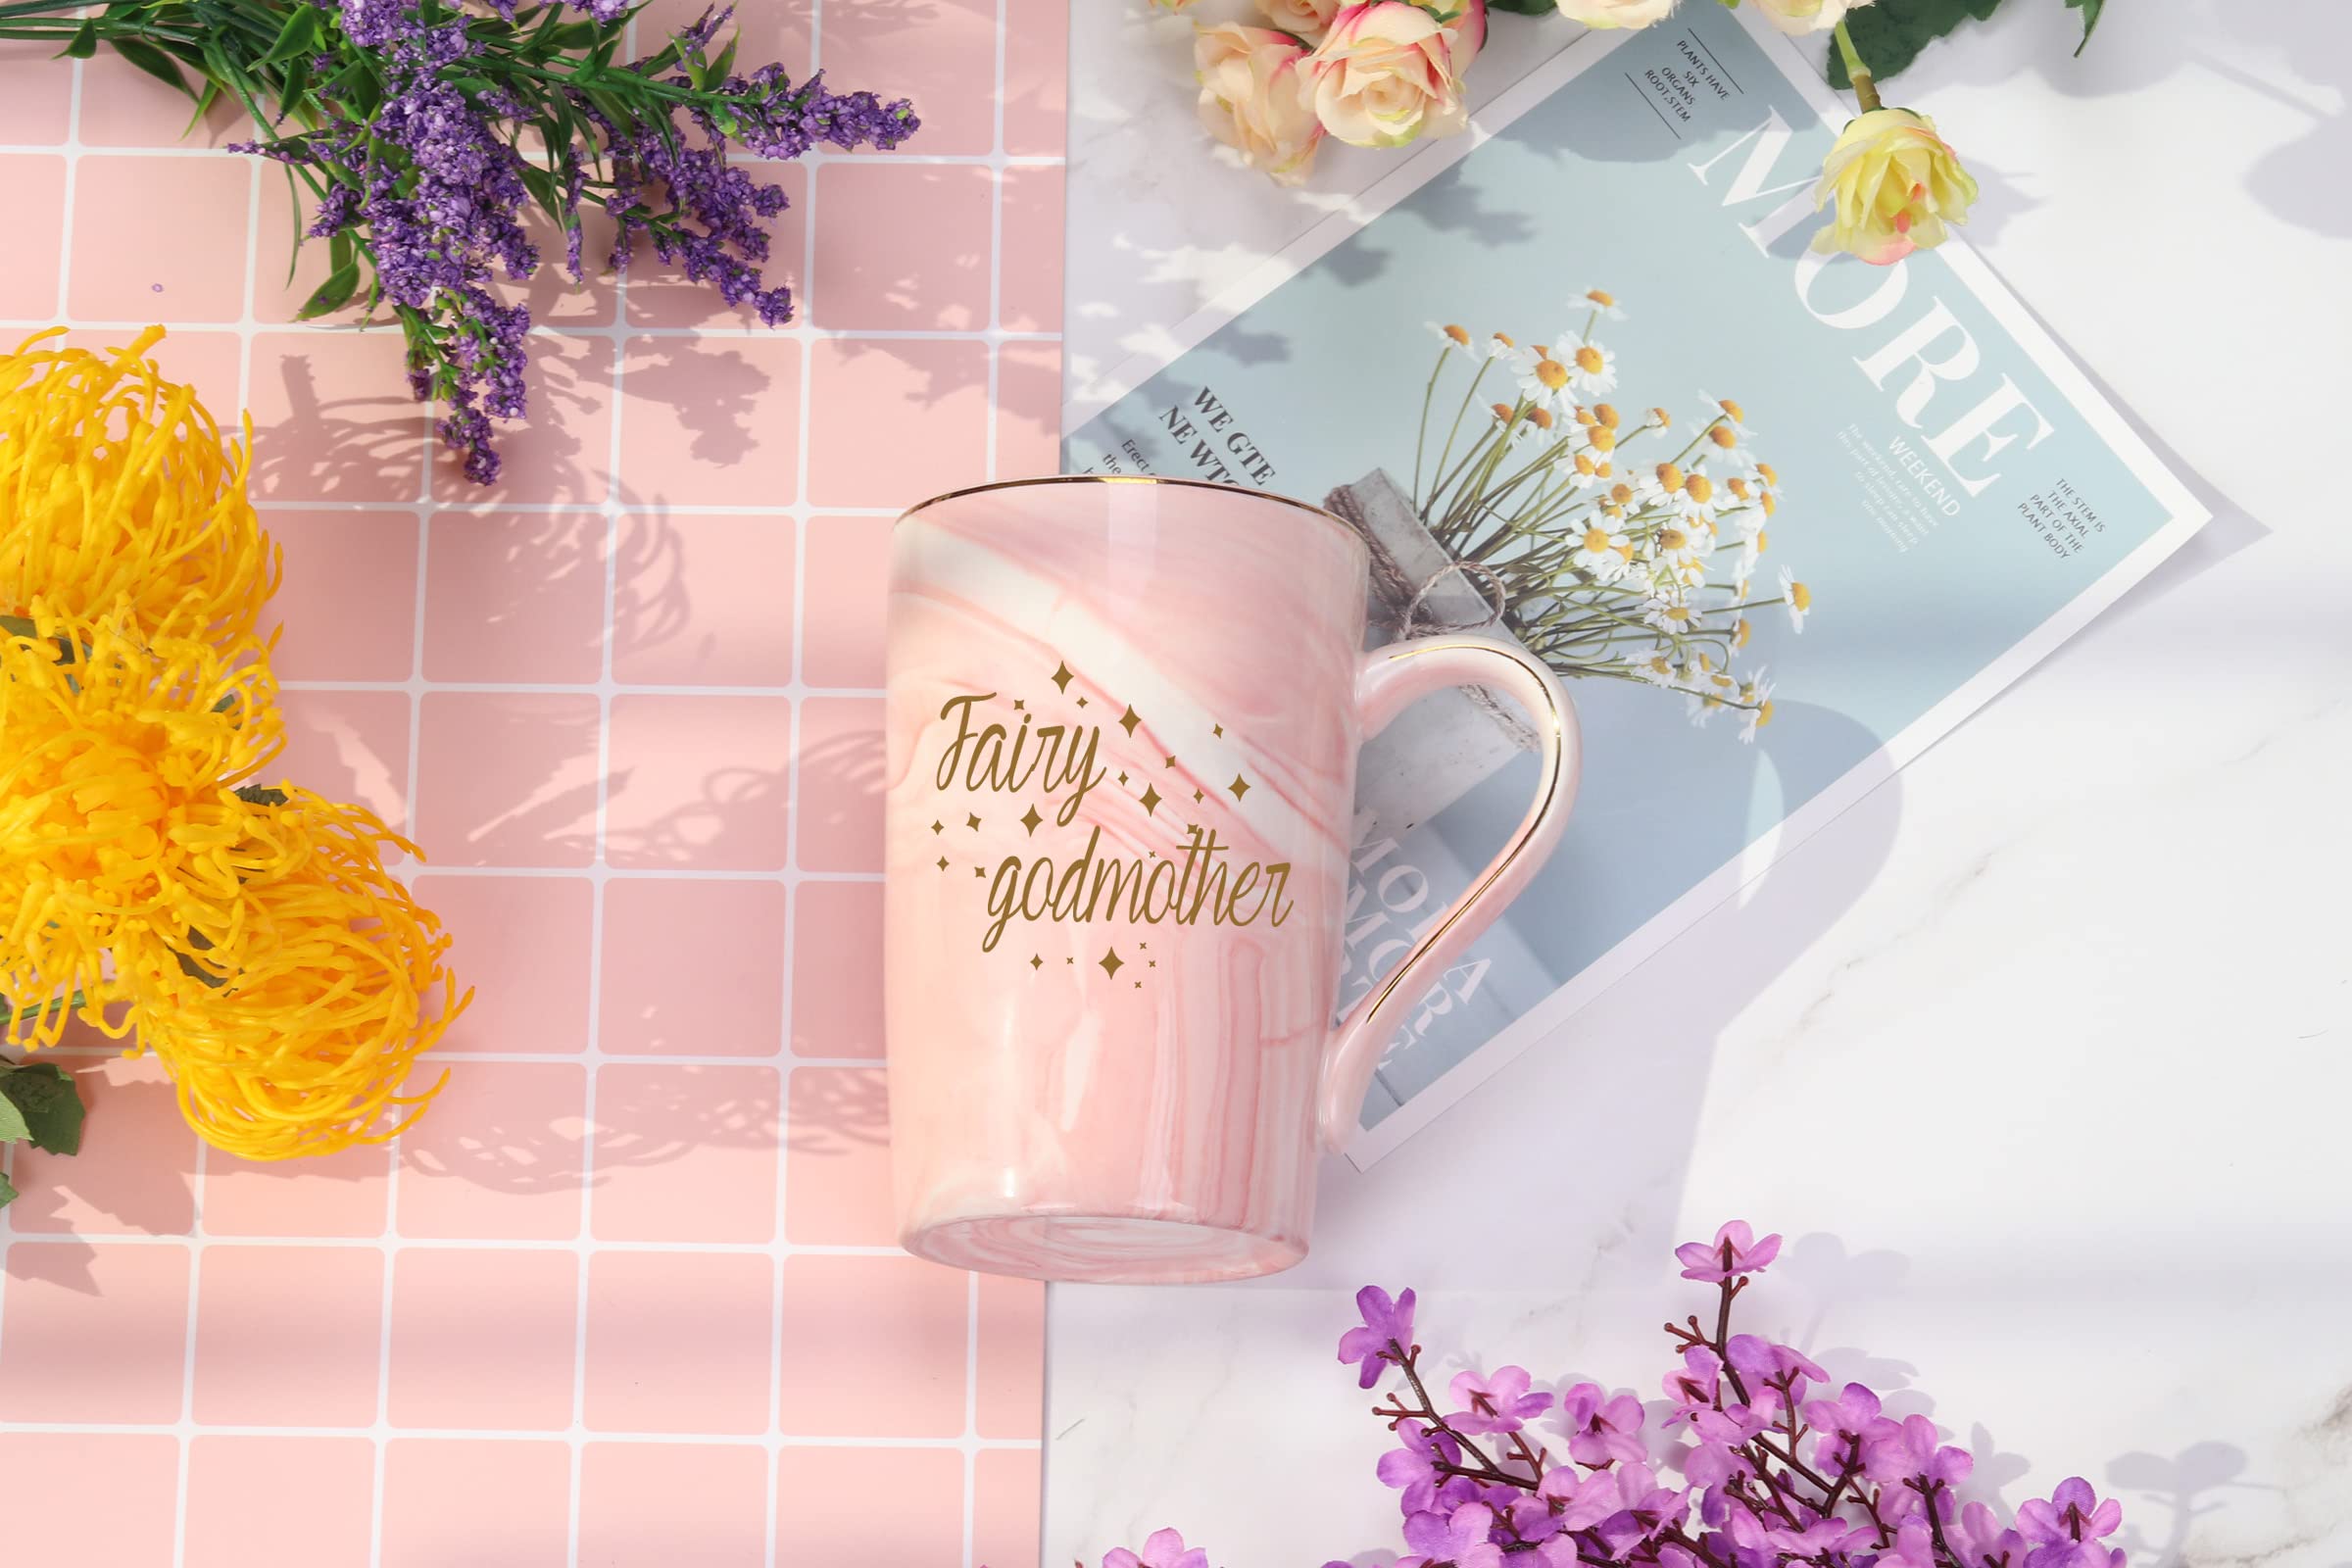 WENSSY Godmother Gifts from Godchild, Fairy Godmother Mug, Fairy Godmother Gifts, Mothers Day Godmother Gifts Mother’s Day Birthday Gifts for Godmother 14 Ounce Pink with Gift Box